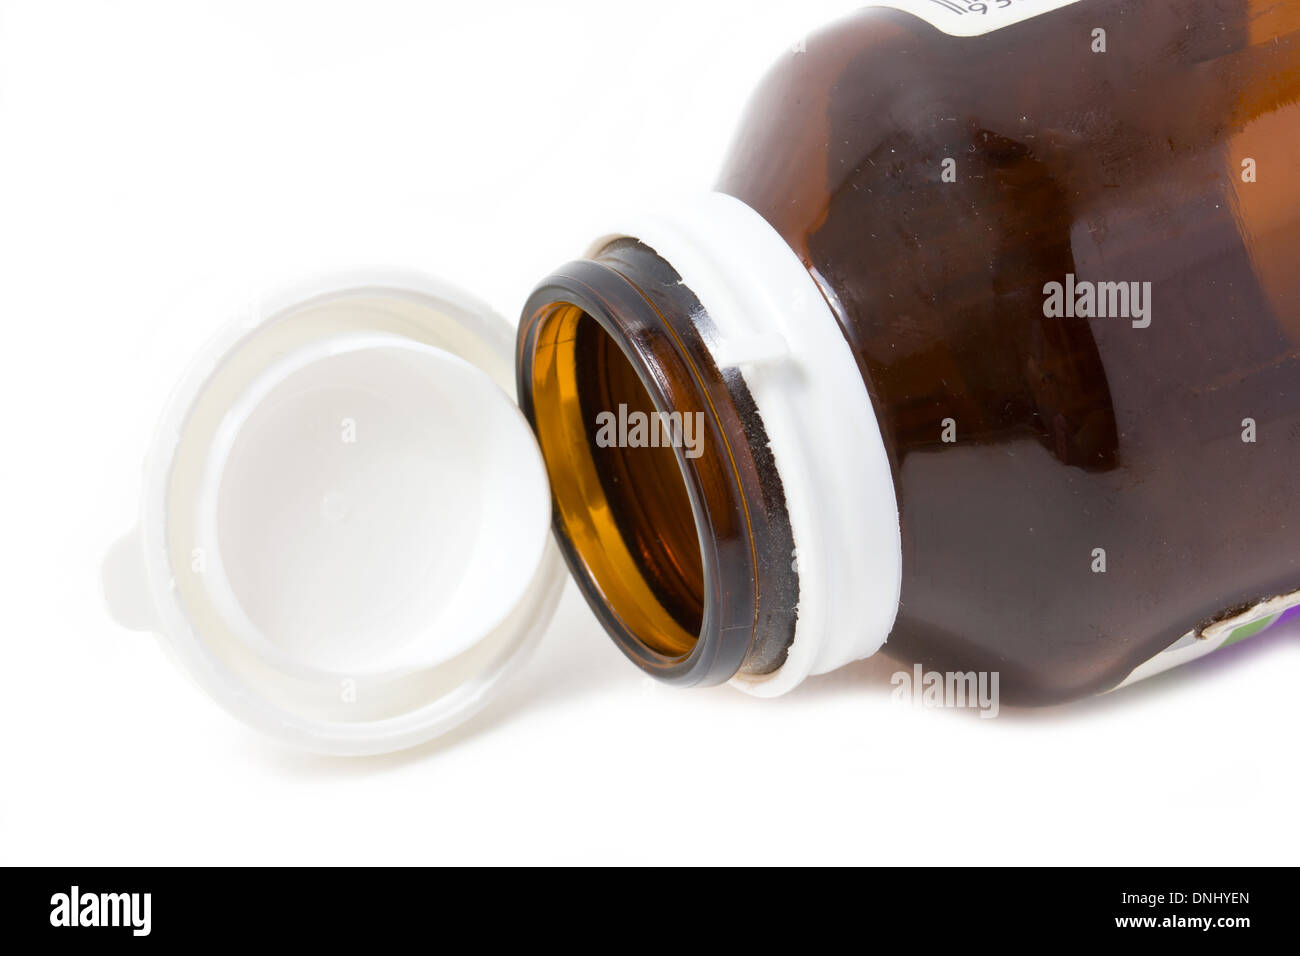 Empty medicine bottle with open cap on white background. Stock Photo